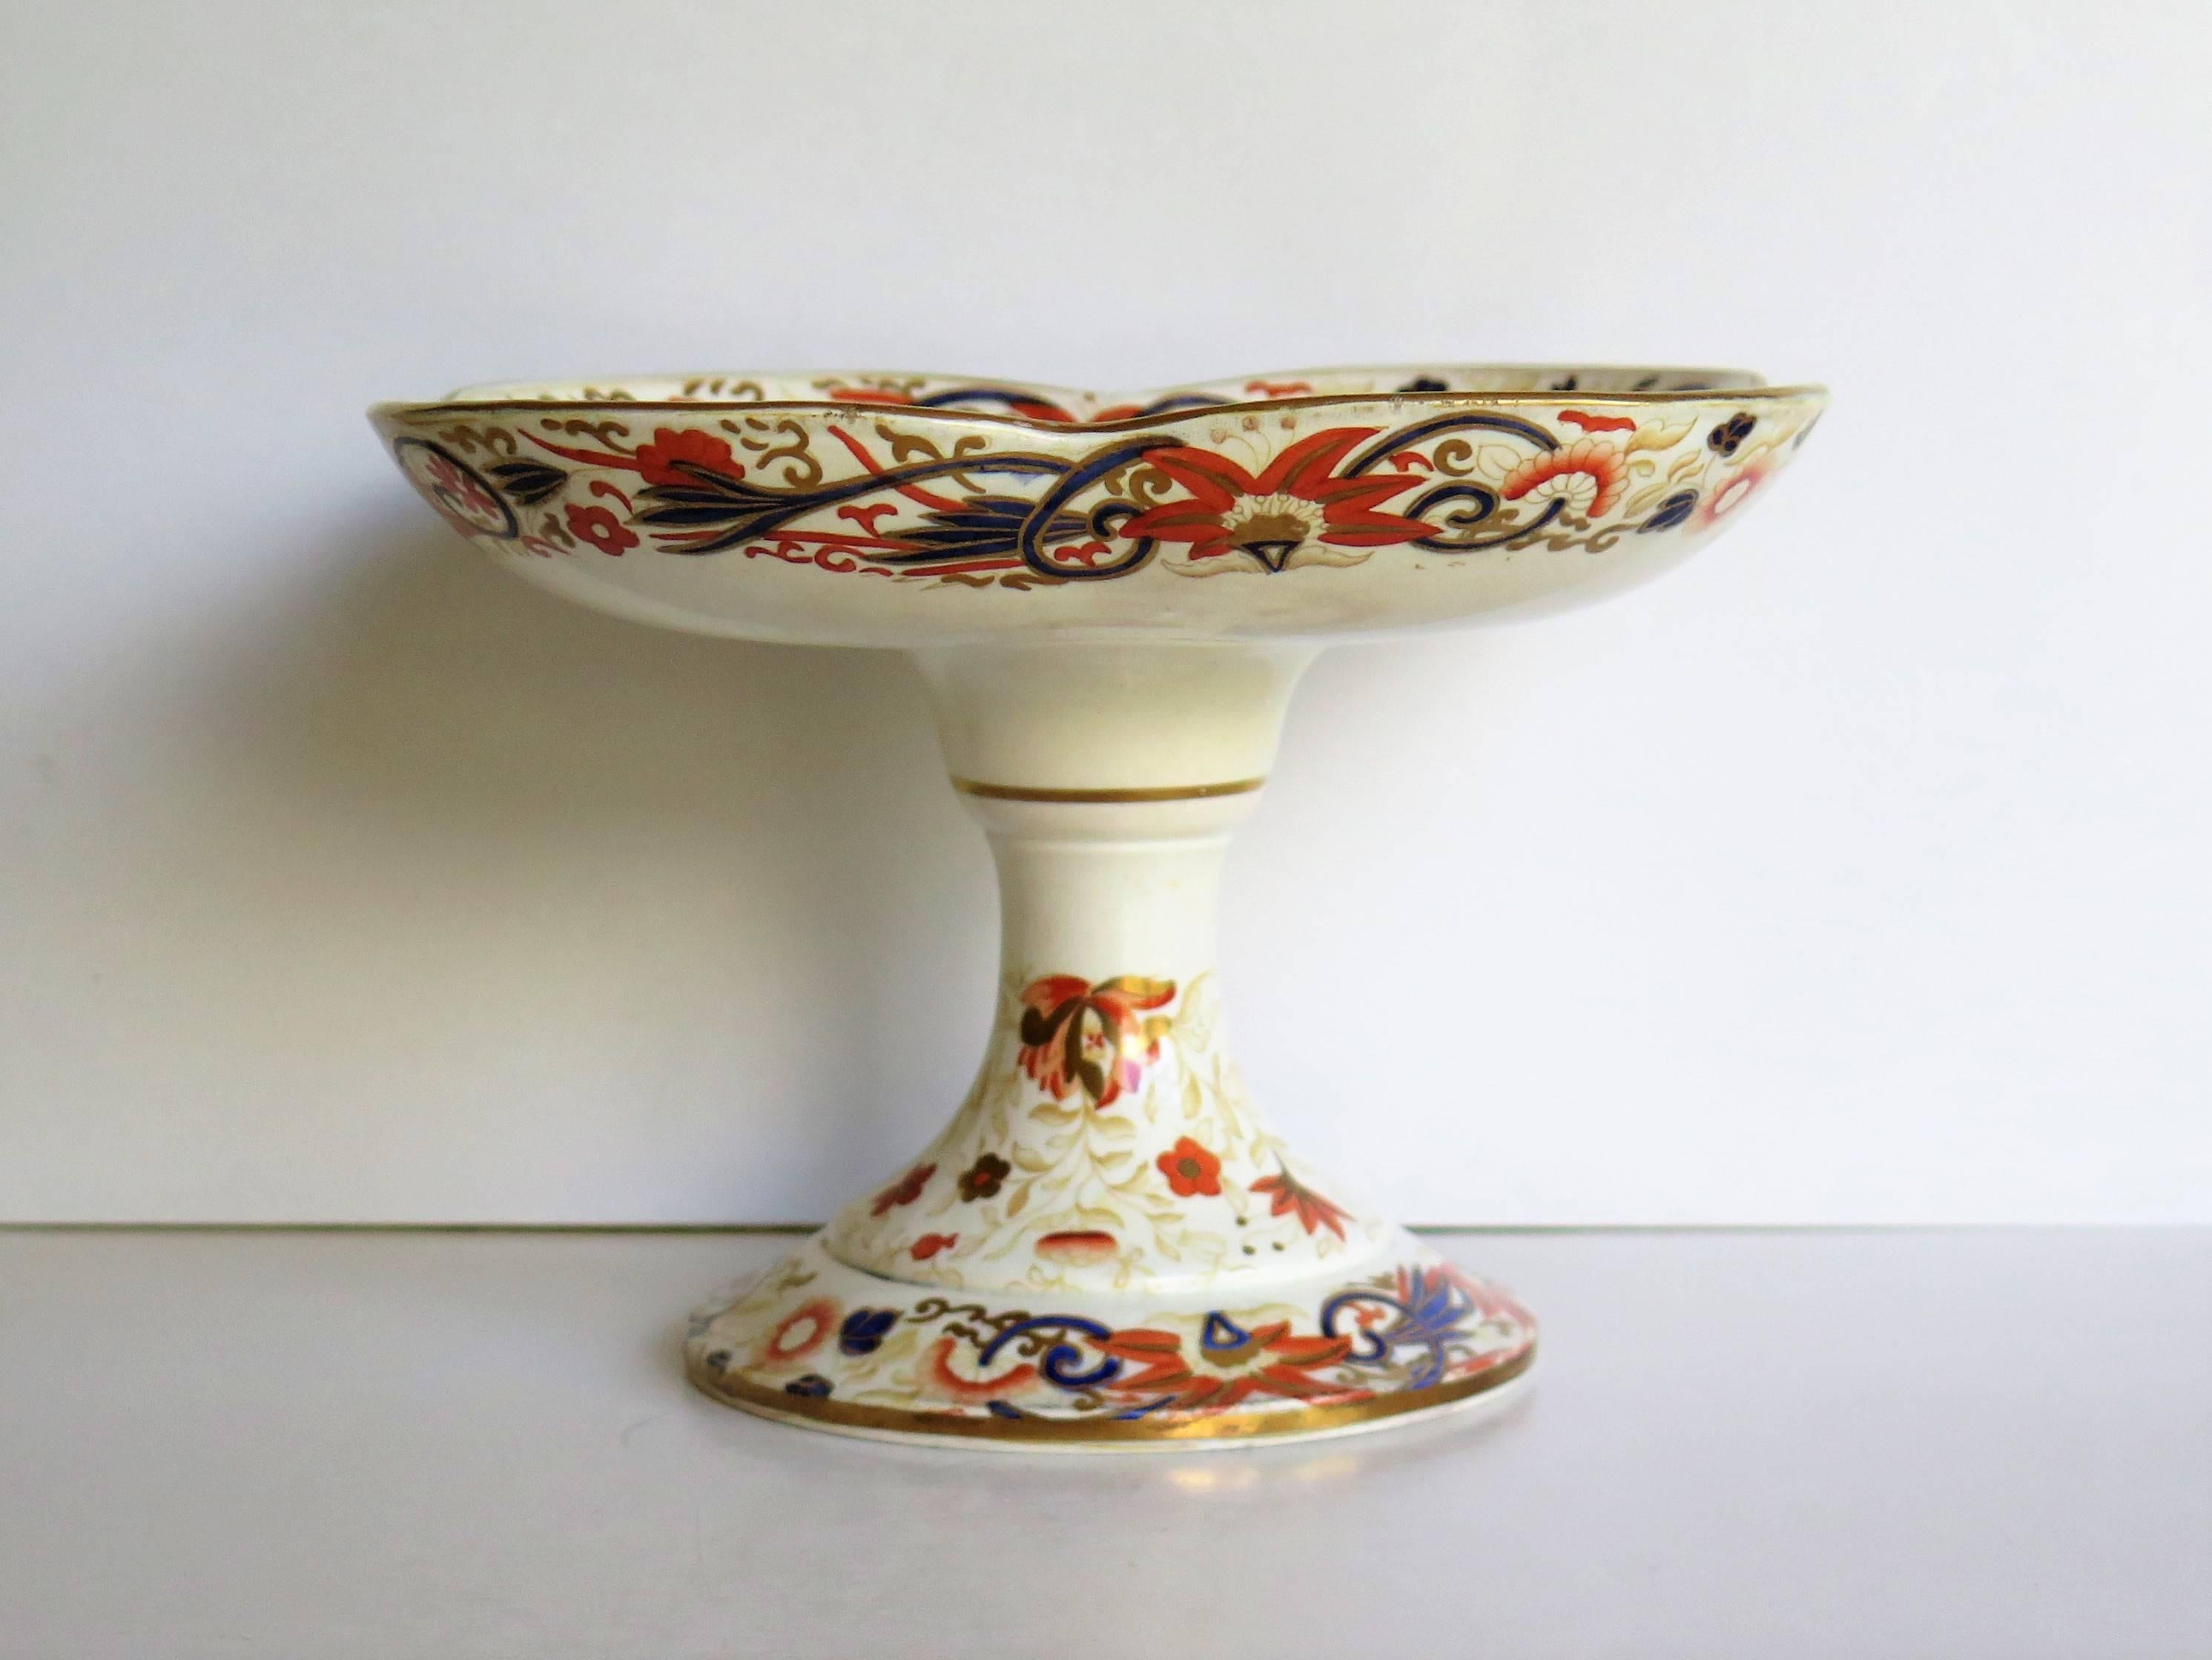 This is a very decorative Wedgwood earthenware Taza or footed Compote, hand painted and fully marked to the base, circa 1875.

The Taza is raised on a circular conical foot leading to a stem holding a square dished top with curved edges. 

The